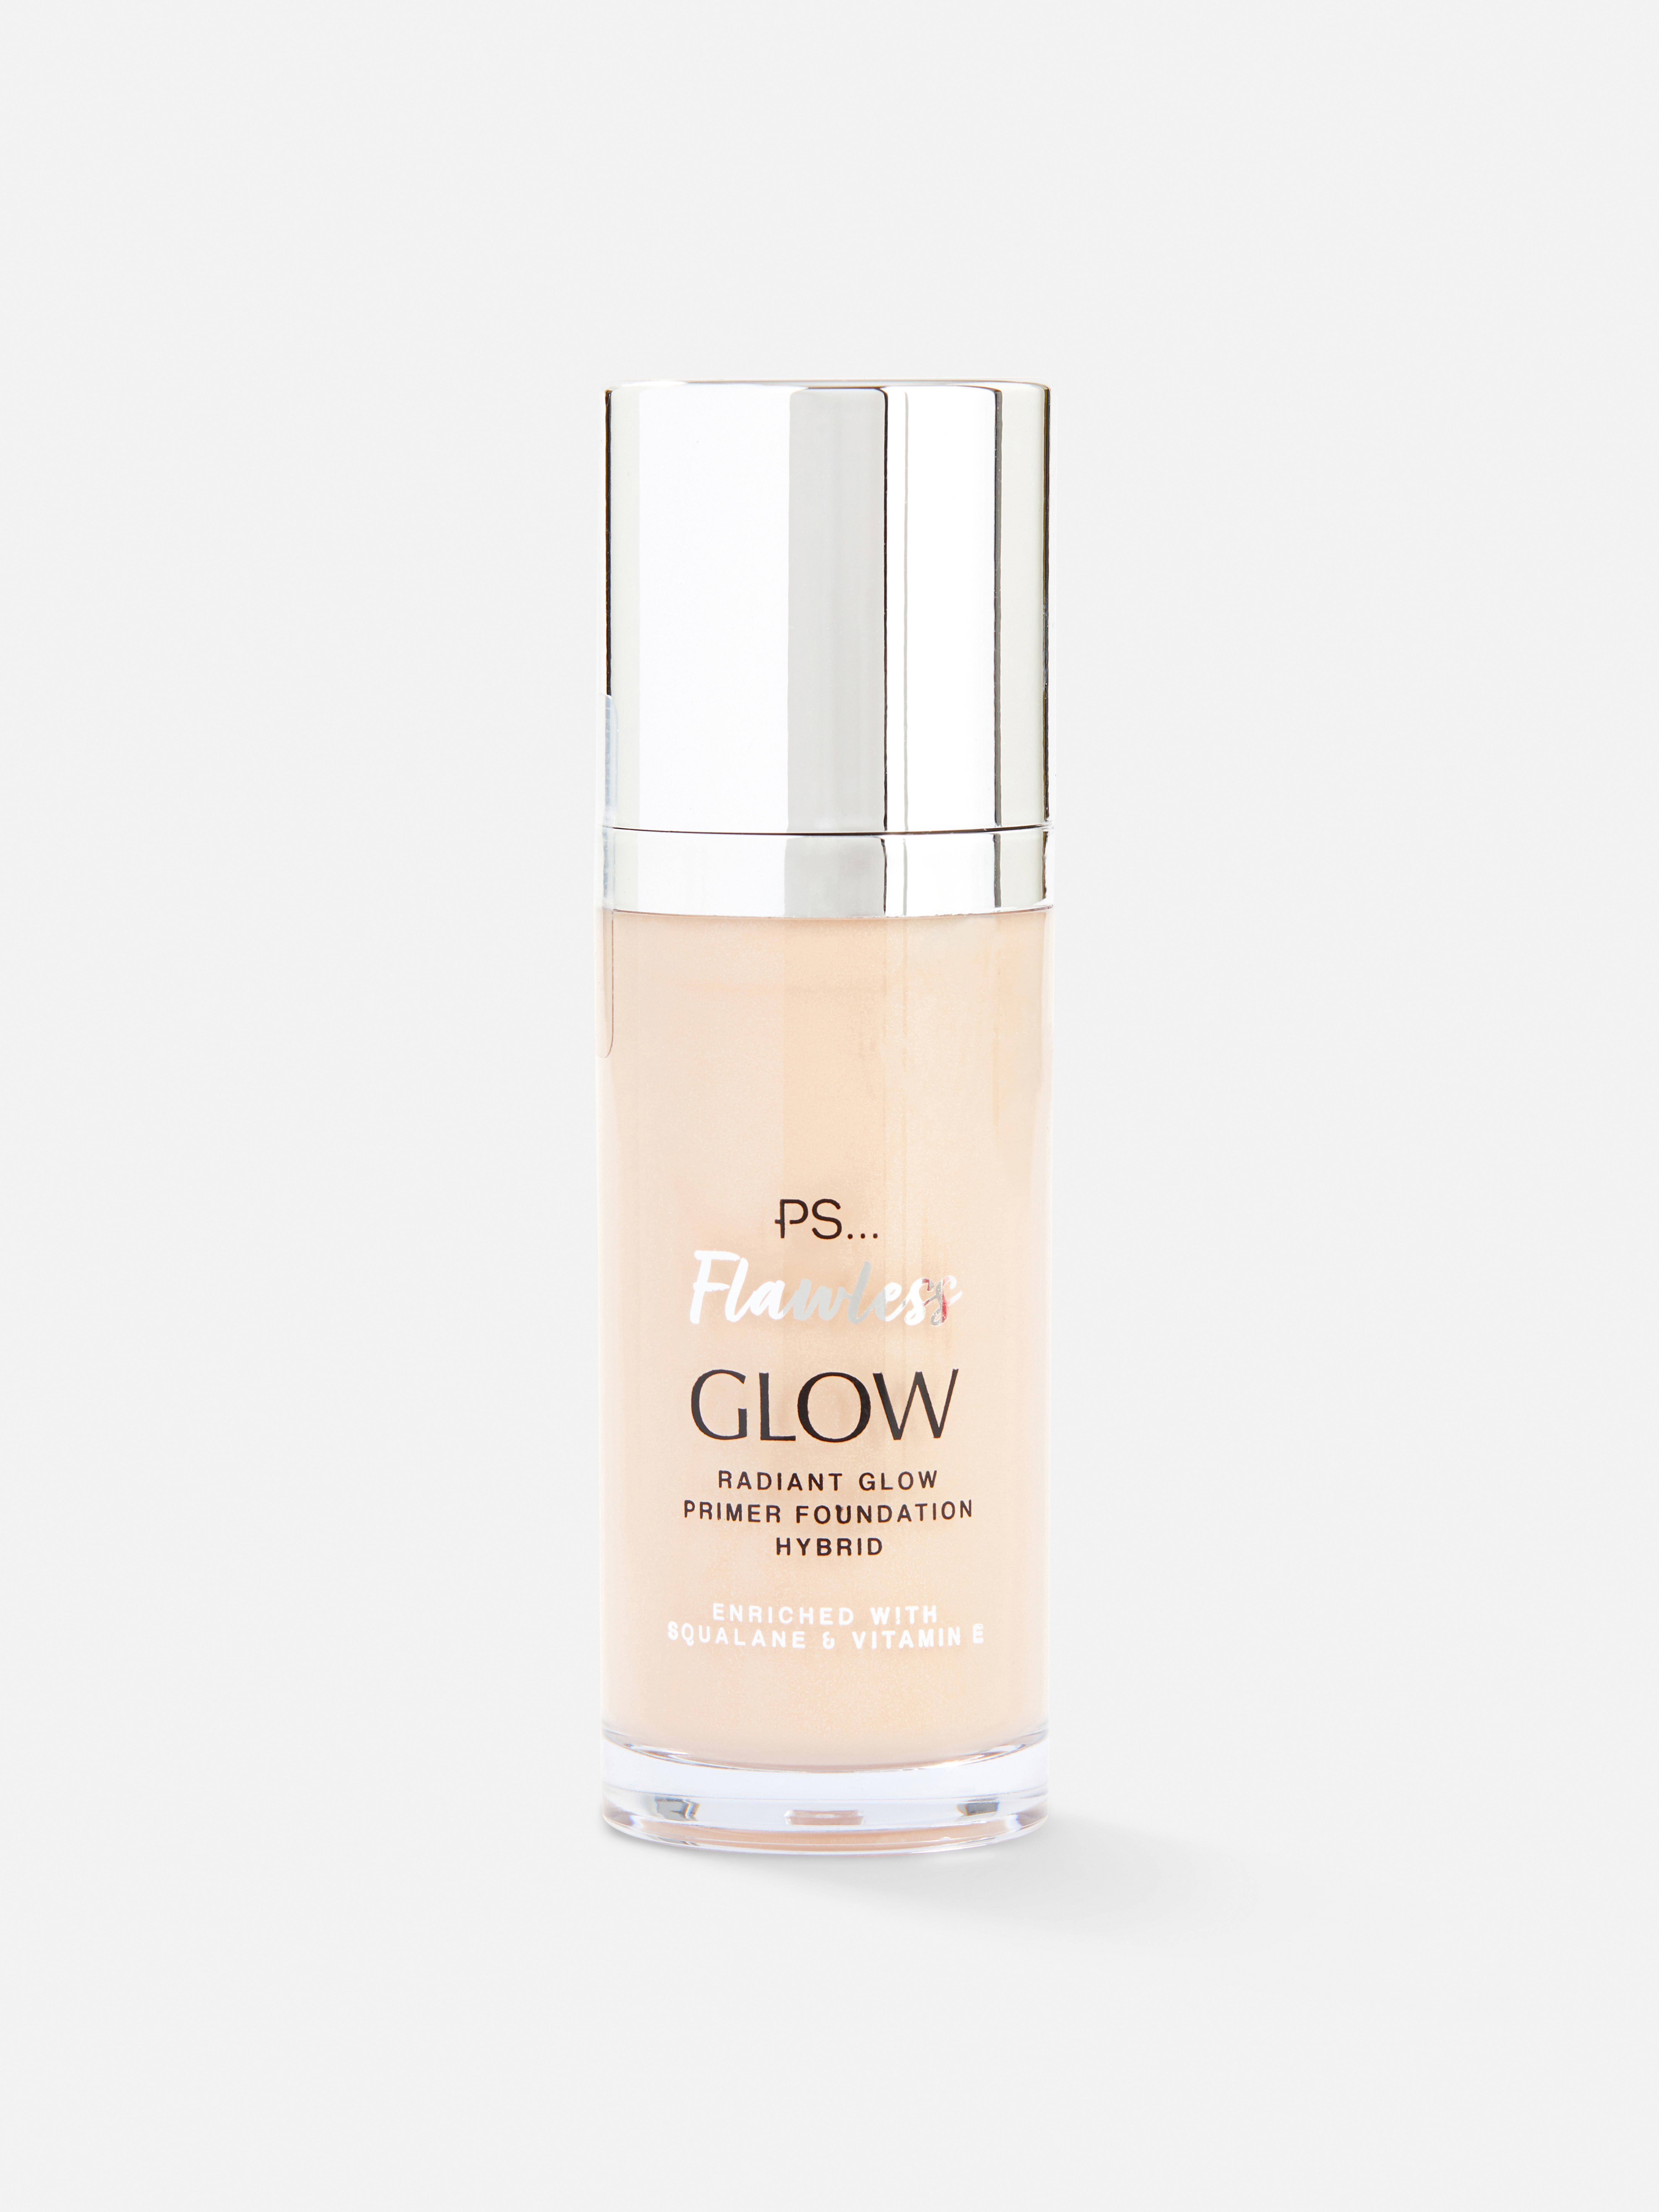 PS... Flawless Glow Radiant Primer Foundation